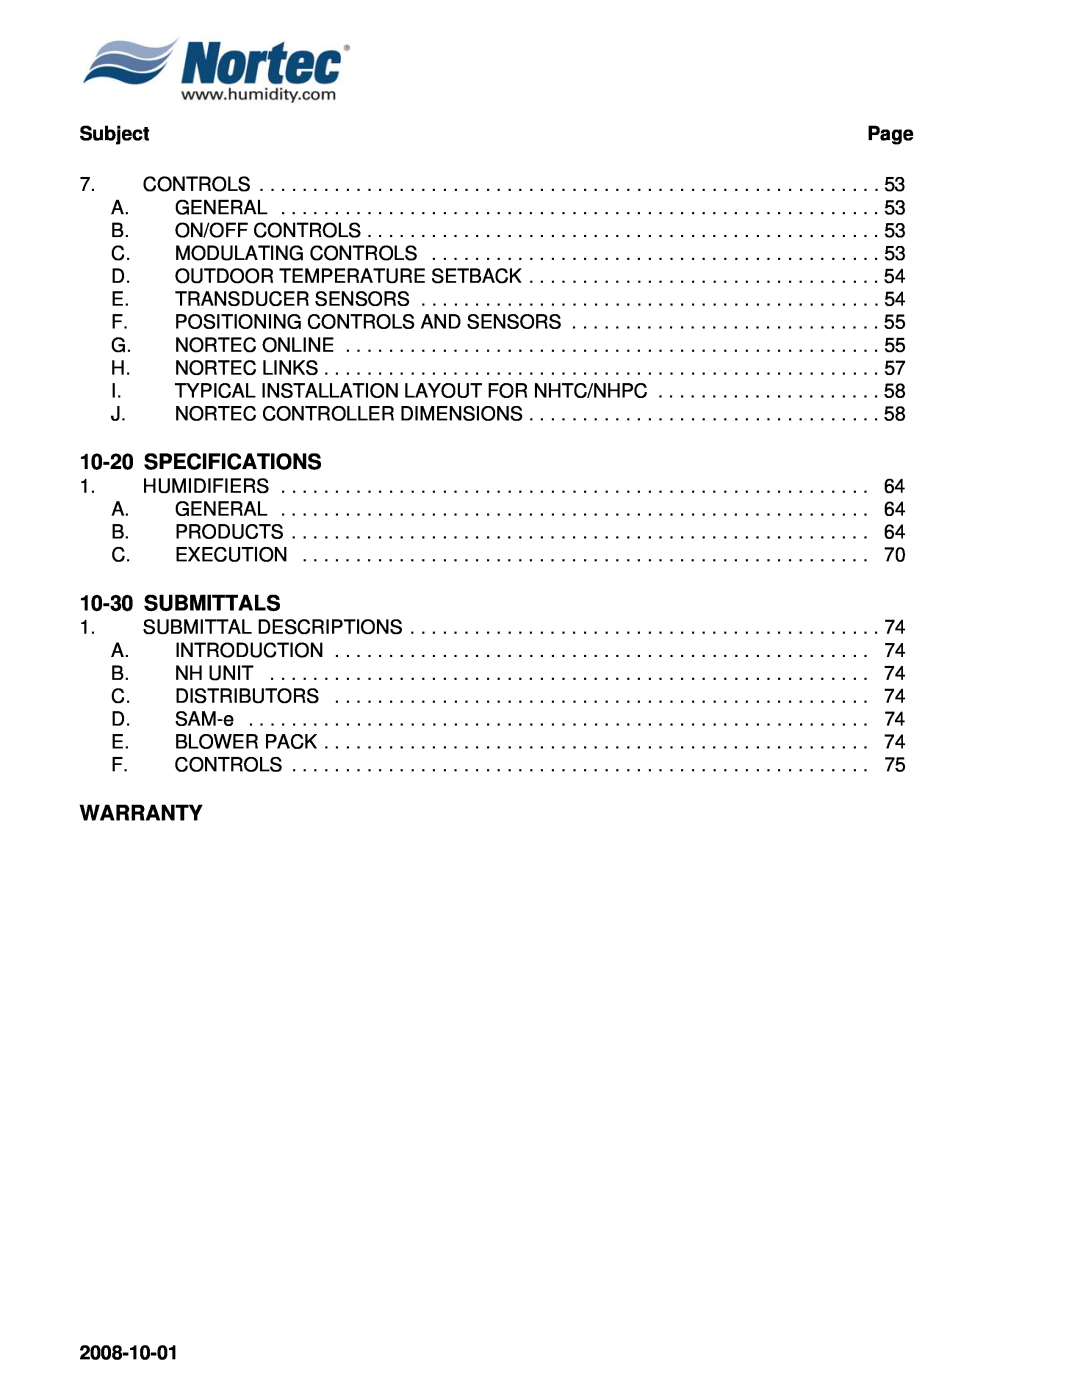 Nortec NHPC, NHTC manual 10-20SPECIFICATIONS, 10-30SUBMITTALS, Warranty, Subject, 2008-10-01 